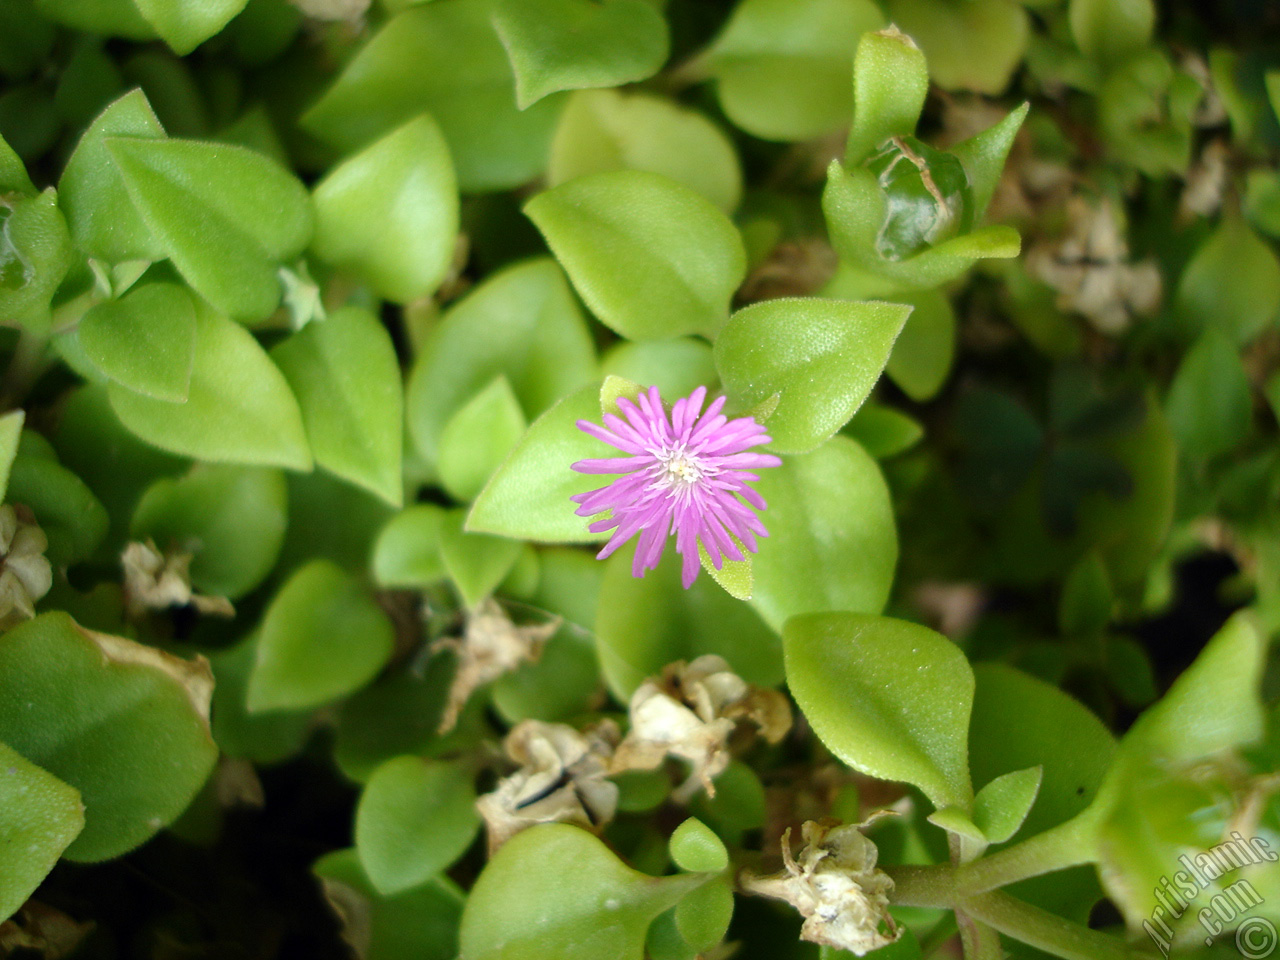 Heartleaf Iceplant -Baby Sun Rose, Rock rose- with pink flowers.
